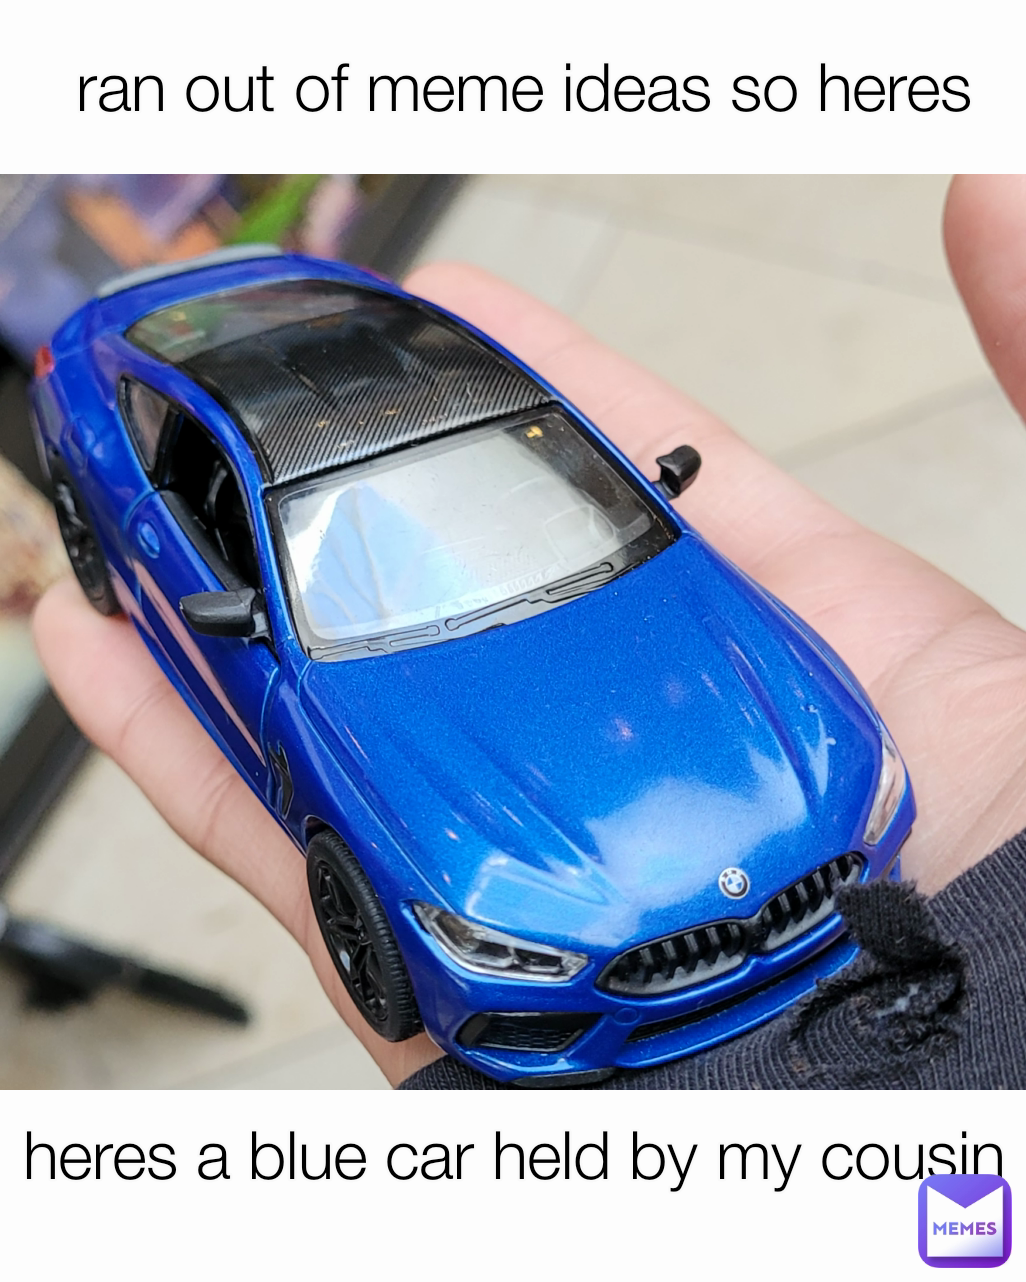 heres a blue car held by my cousin ran out of meme ideas so heres